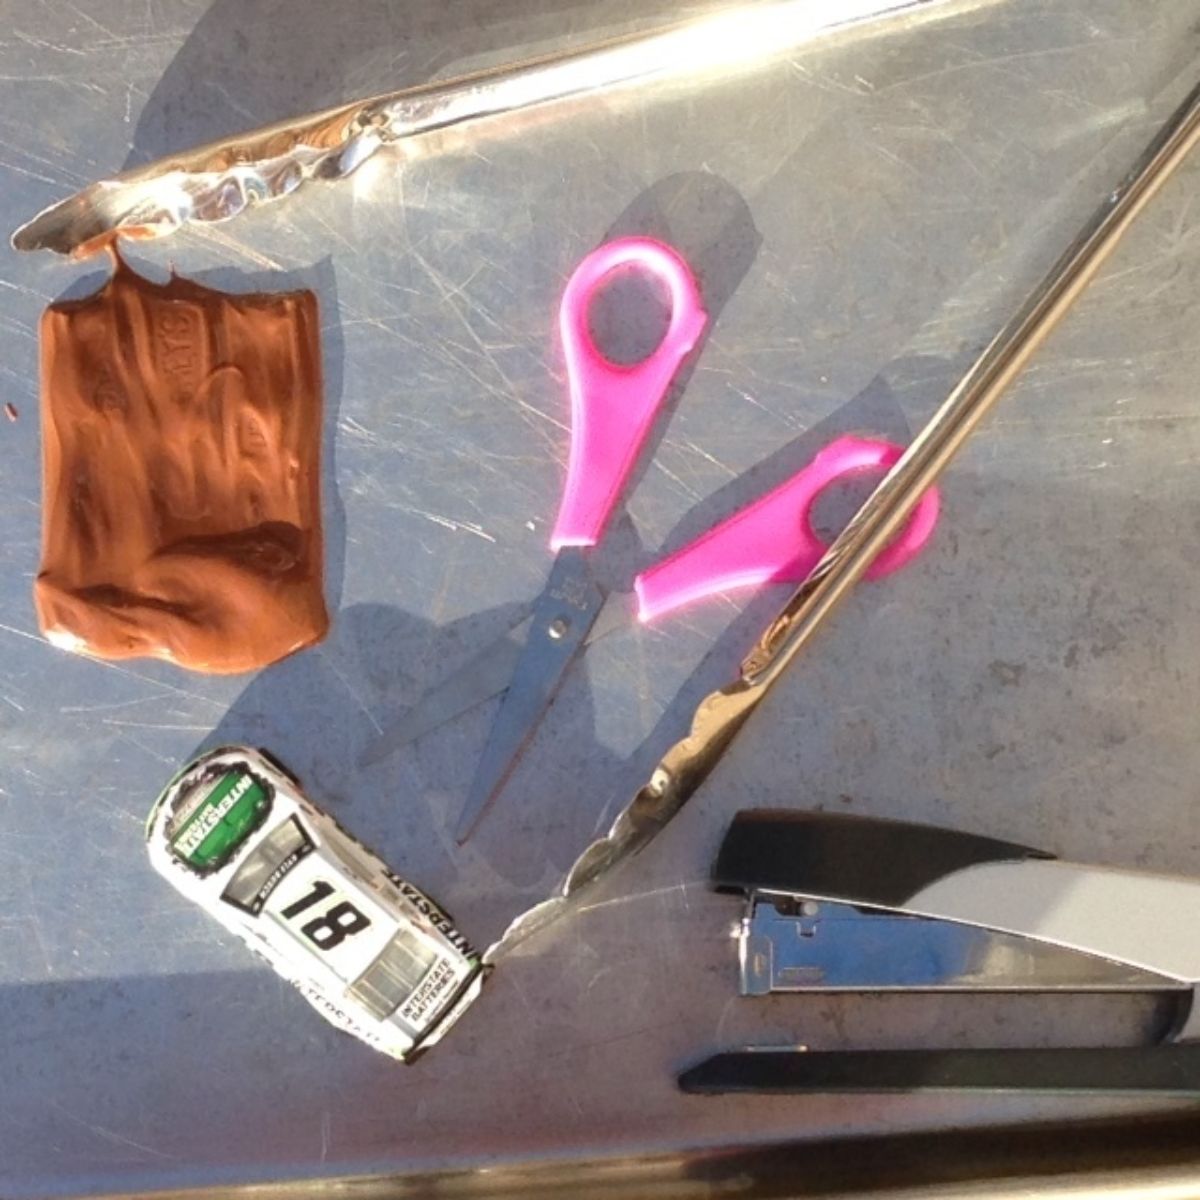 on a metal top is a collection of items: a pair of pink scissors, chocolate, metal tongs, a toy car and a stapler